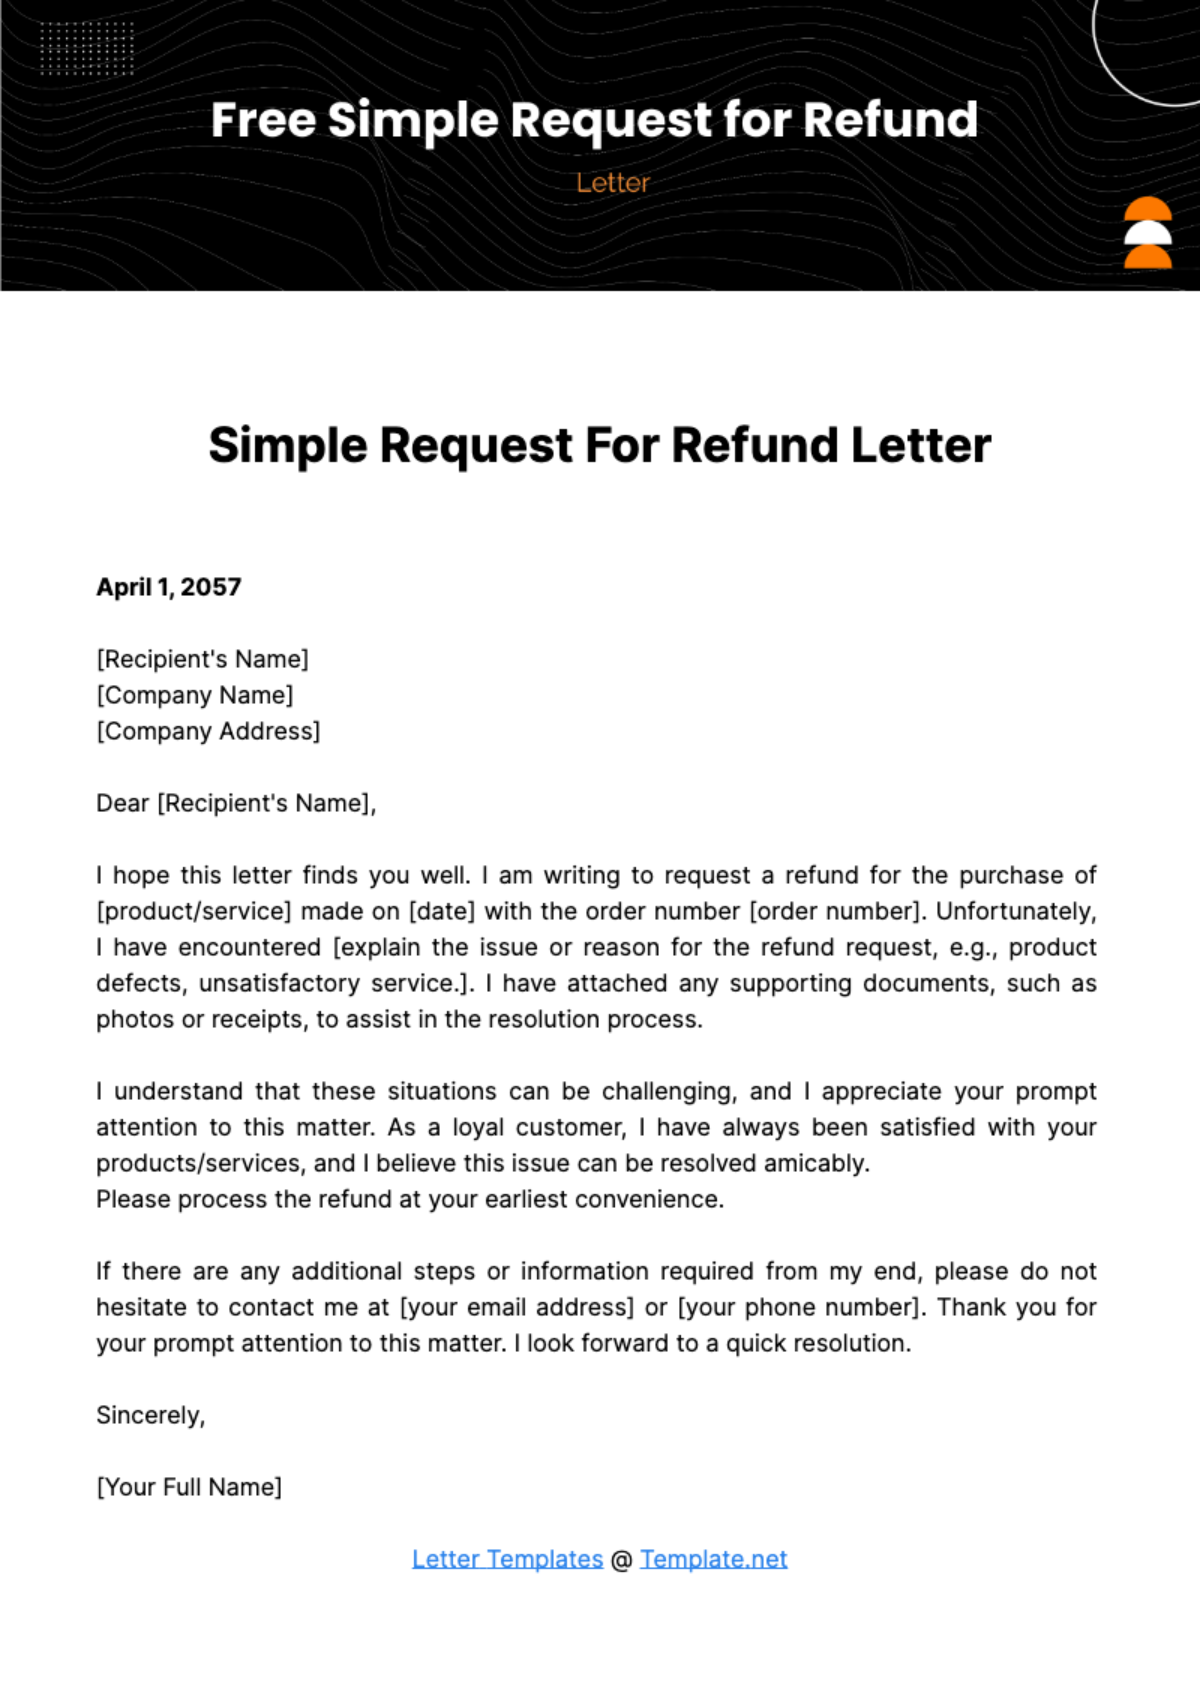 Simple Request for Refund Letter Template